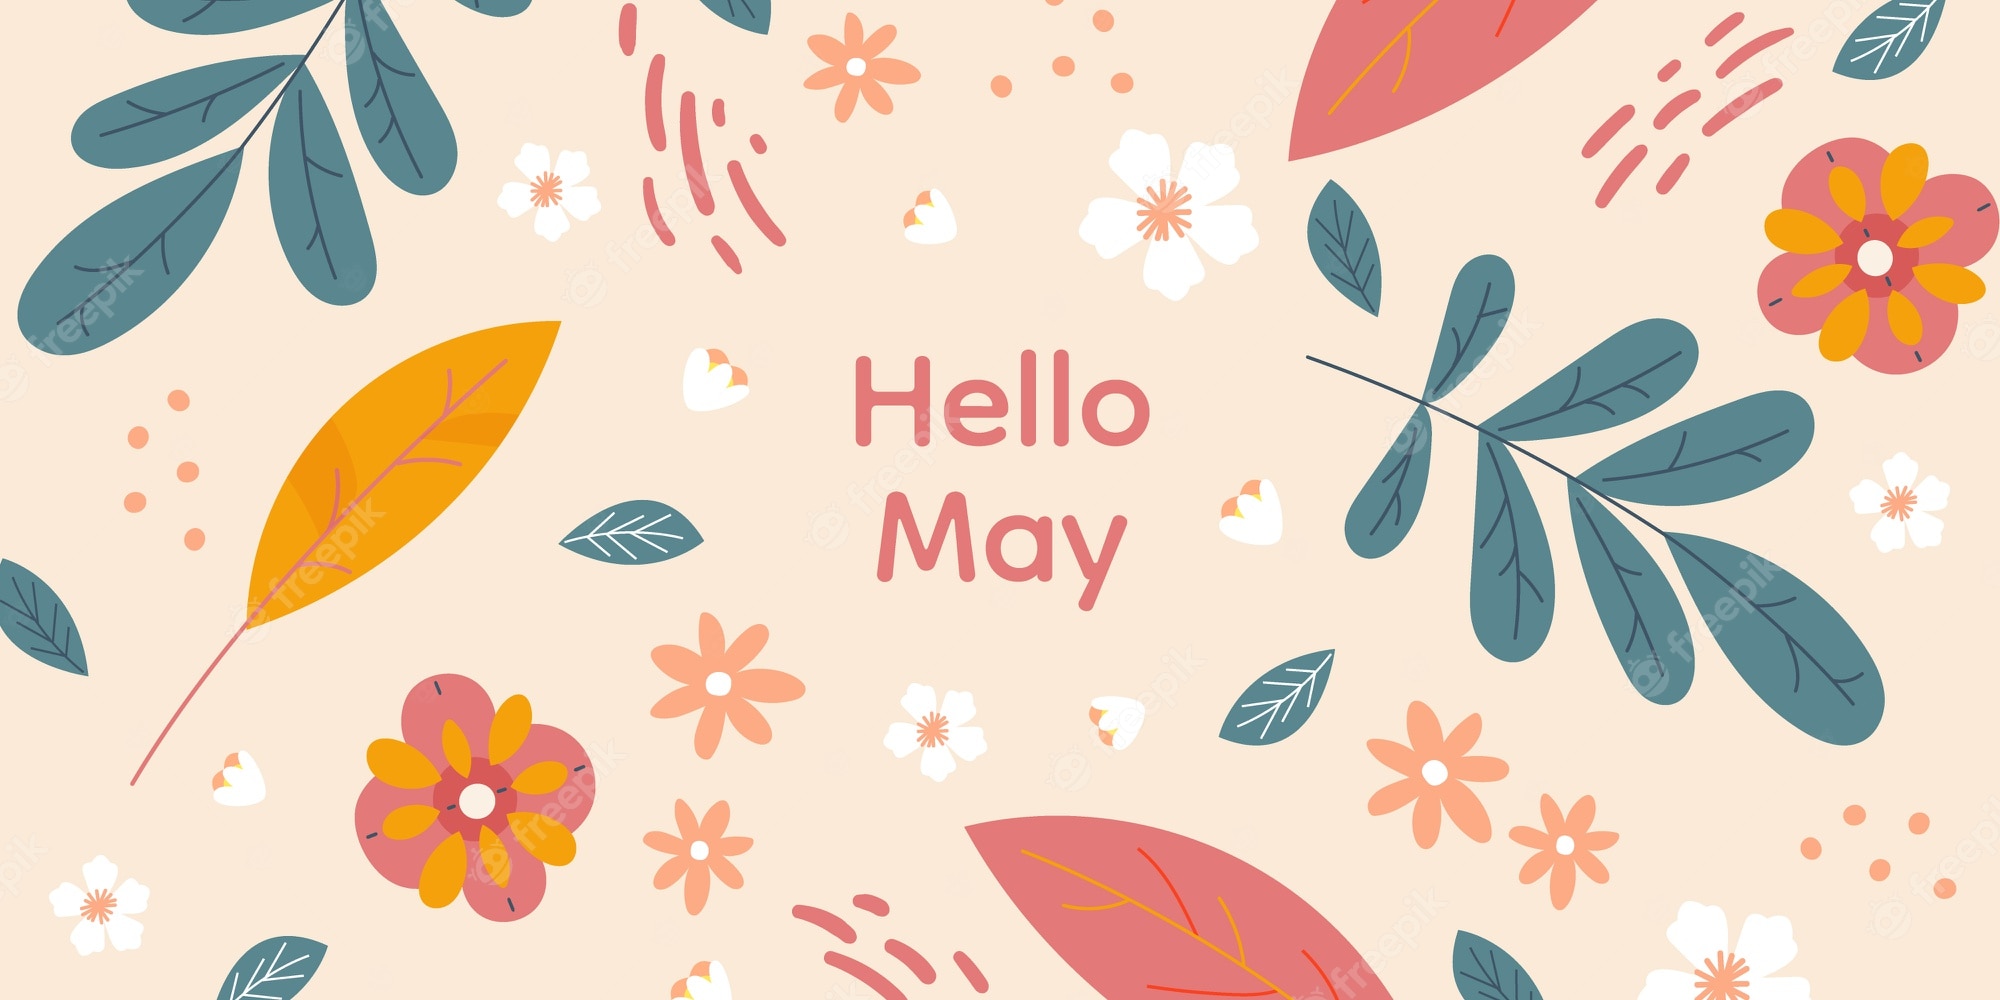 Hello may with flowers and leaves - May